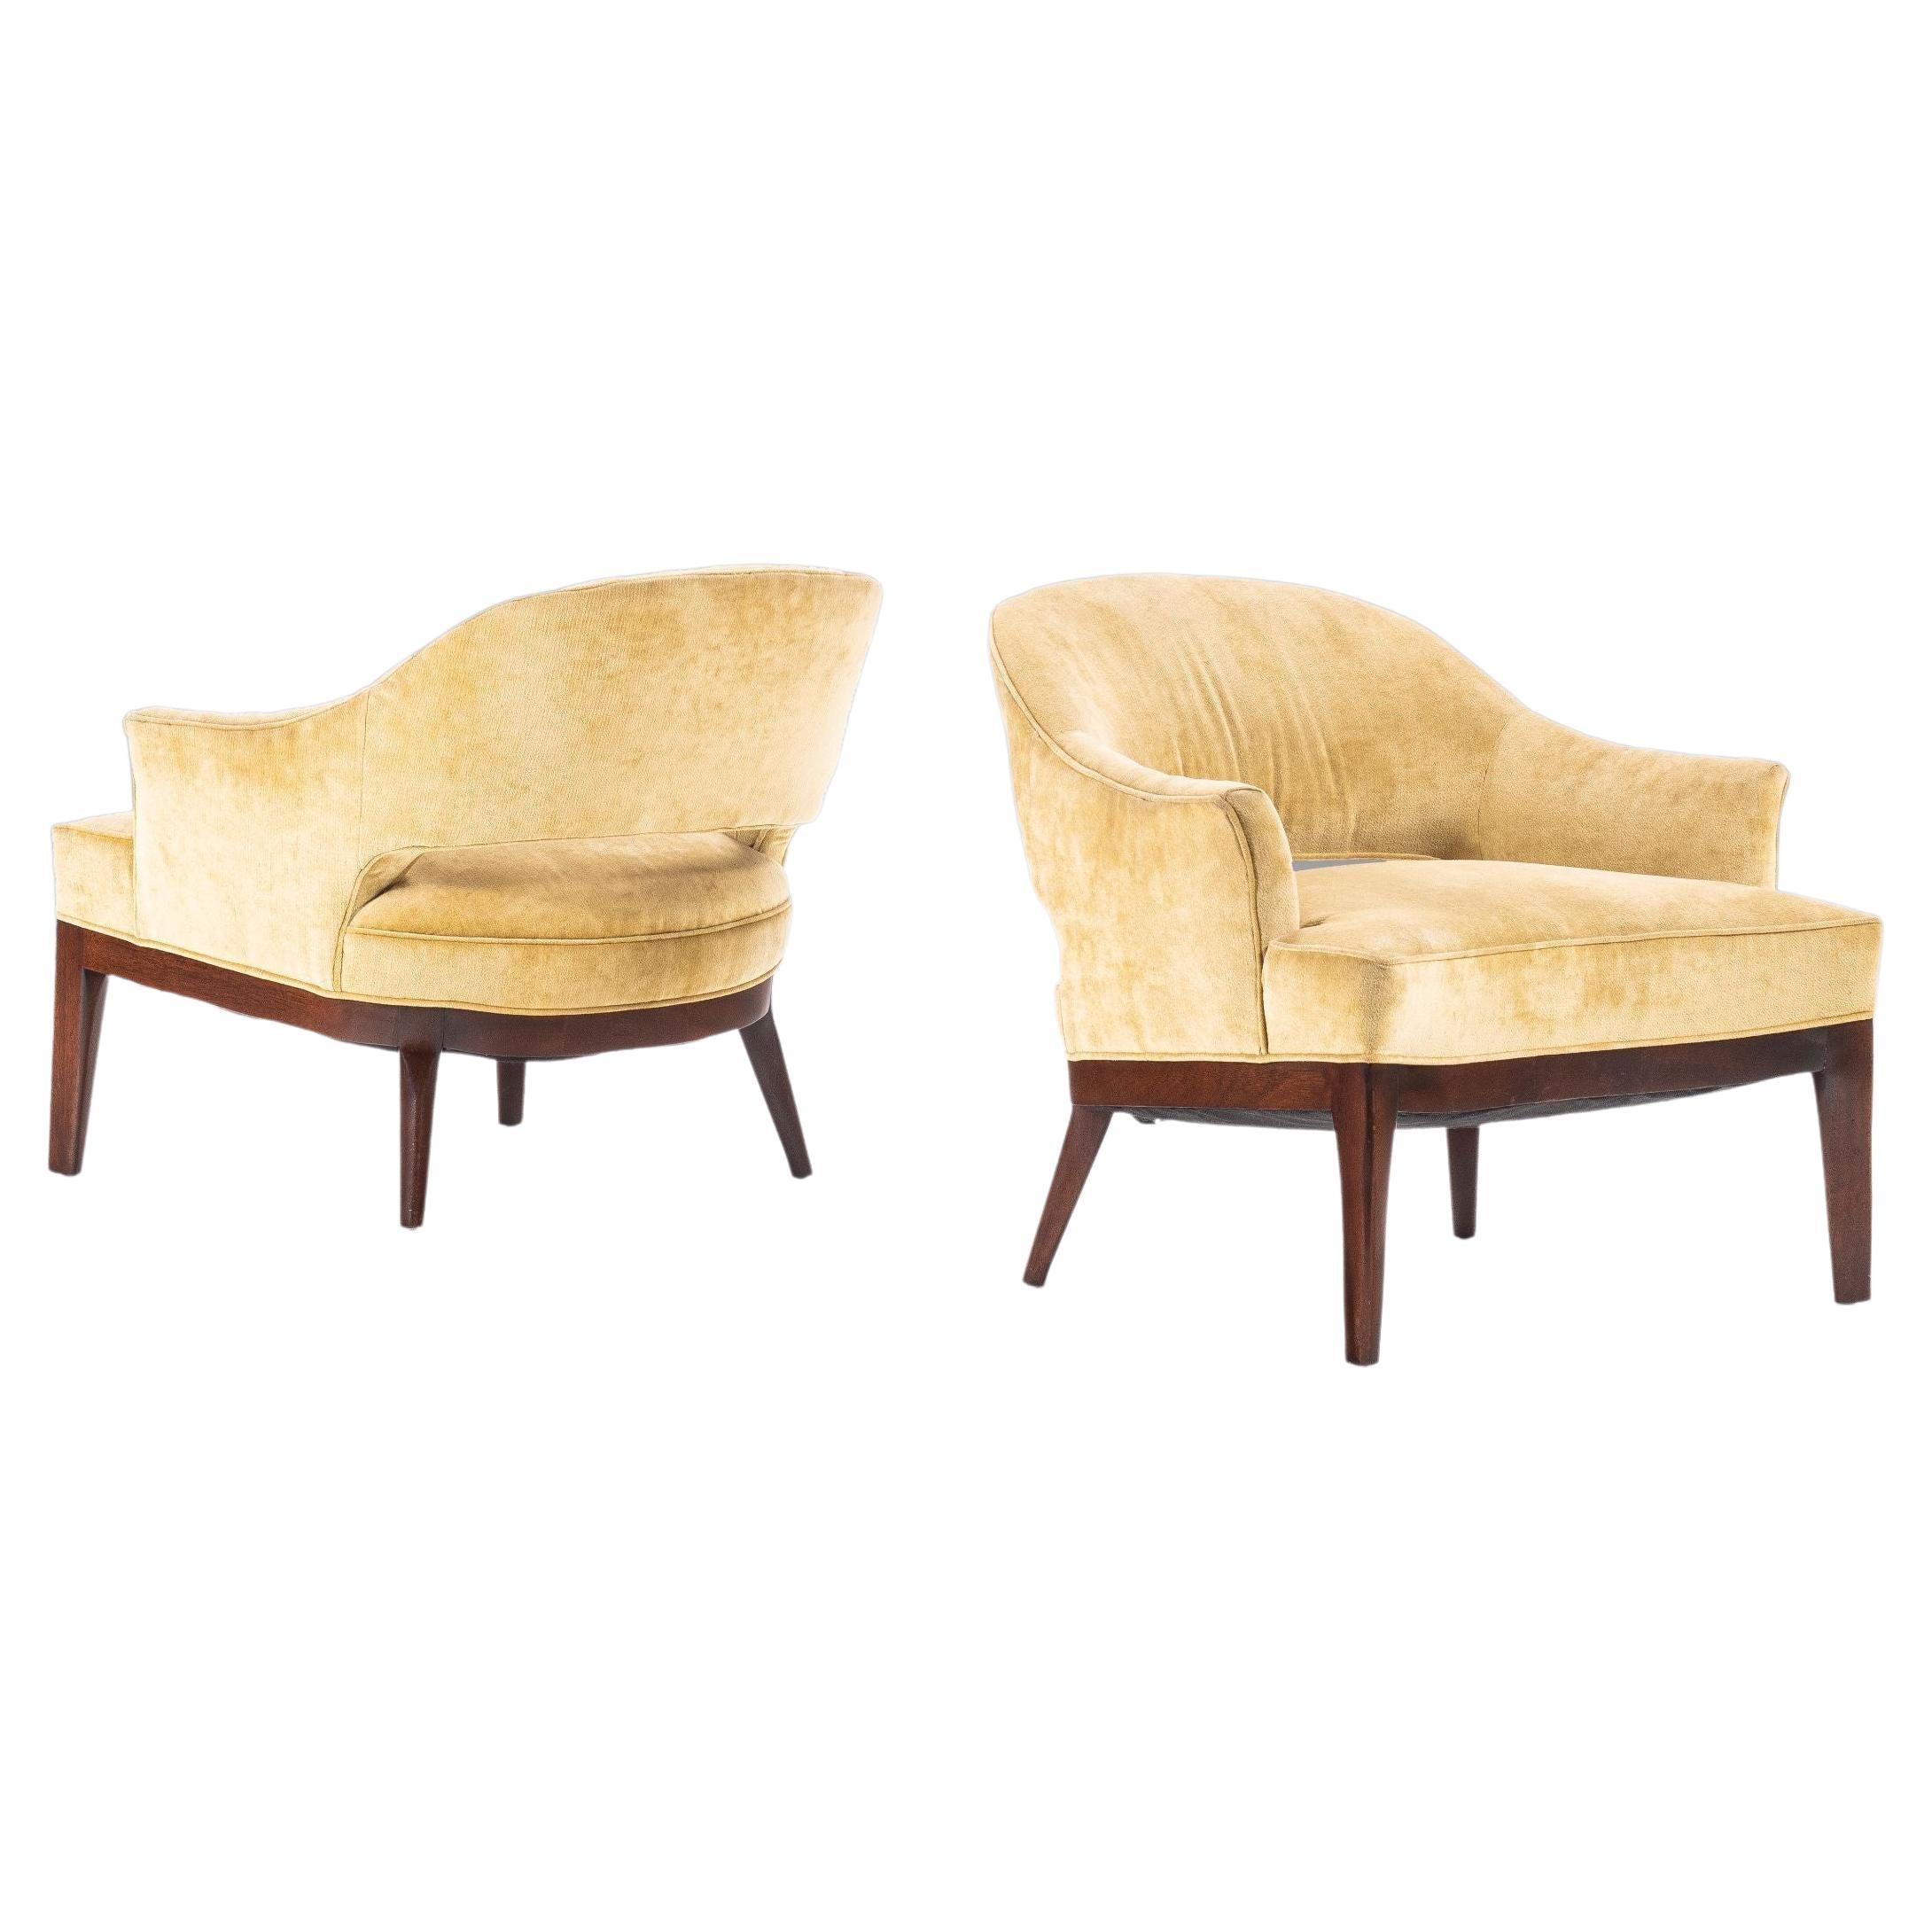 Set of Two '2' Saber-Leg Lounge Chairs Attributed to Harvey Probber, USA, 1960's For Sale